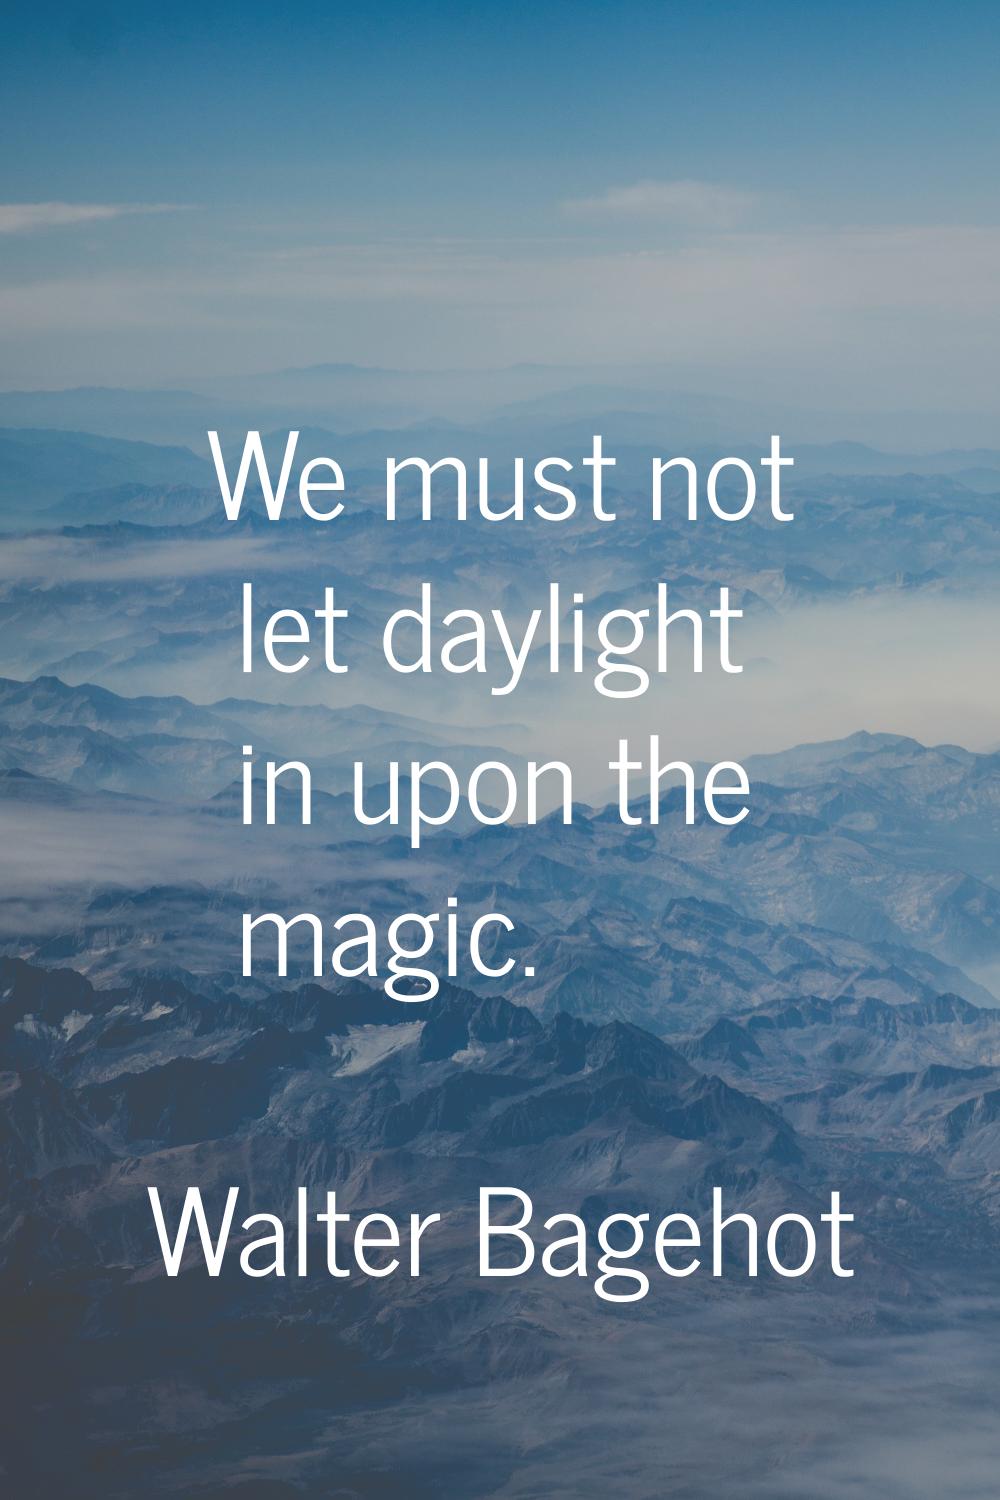 We must not let daylight in upon the magic.